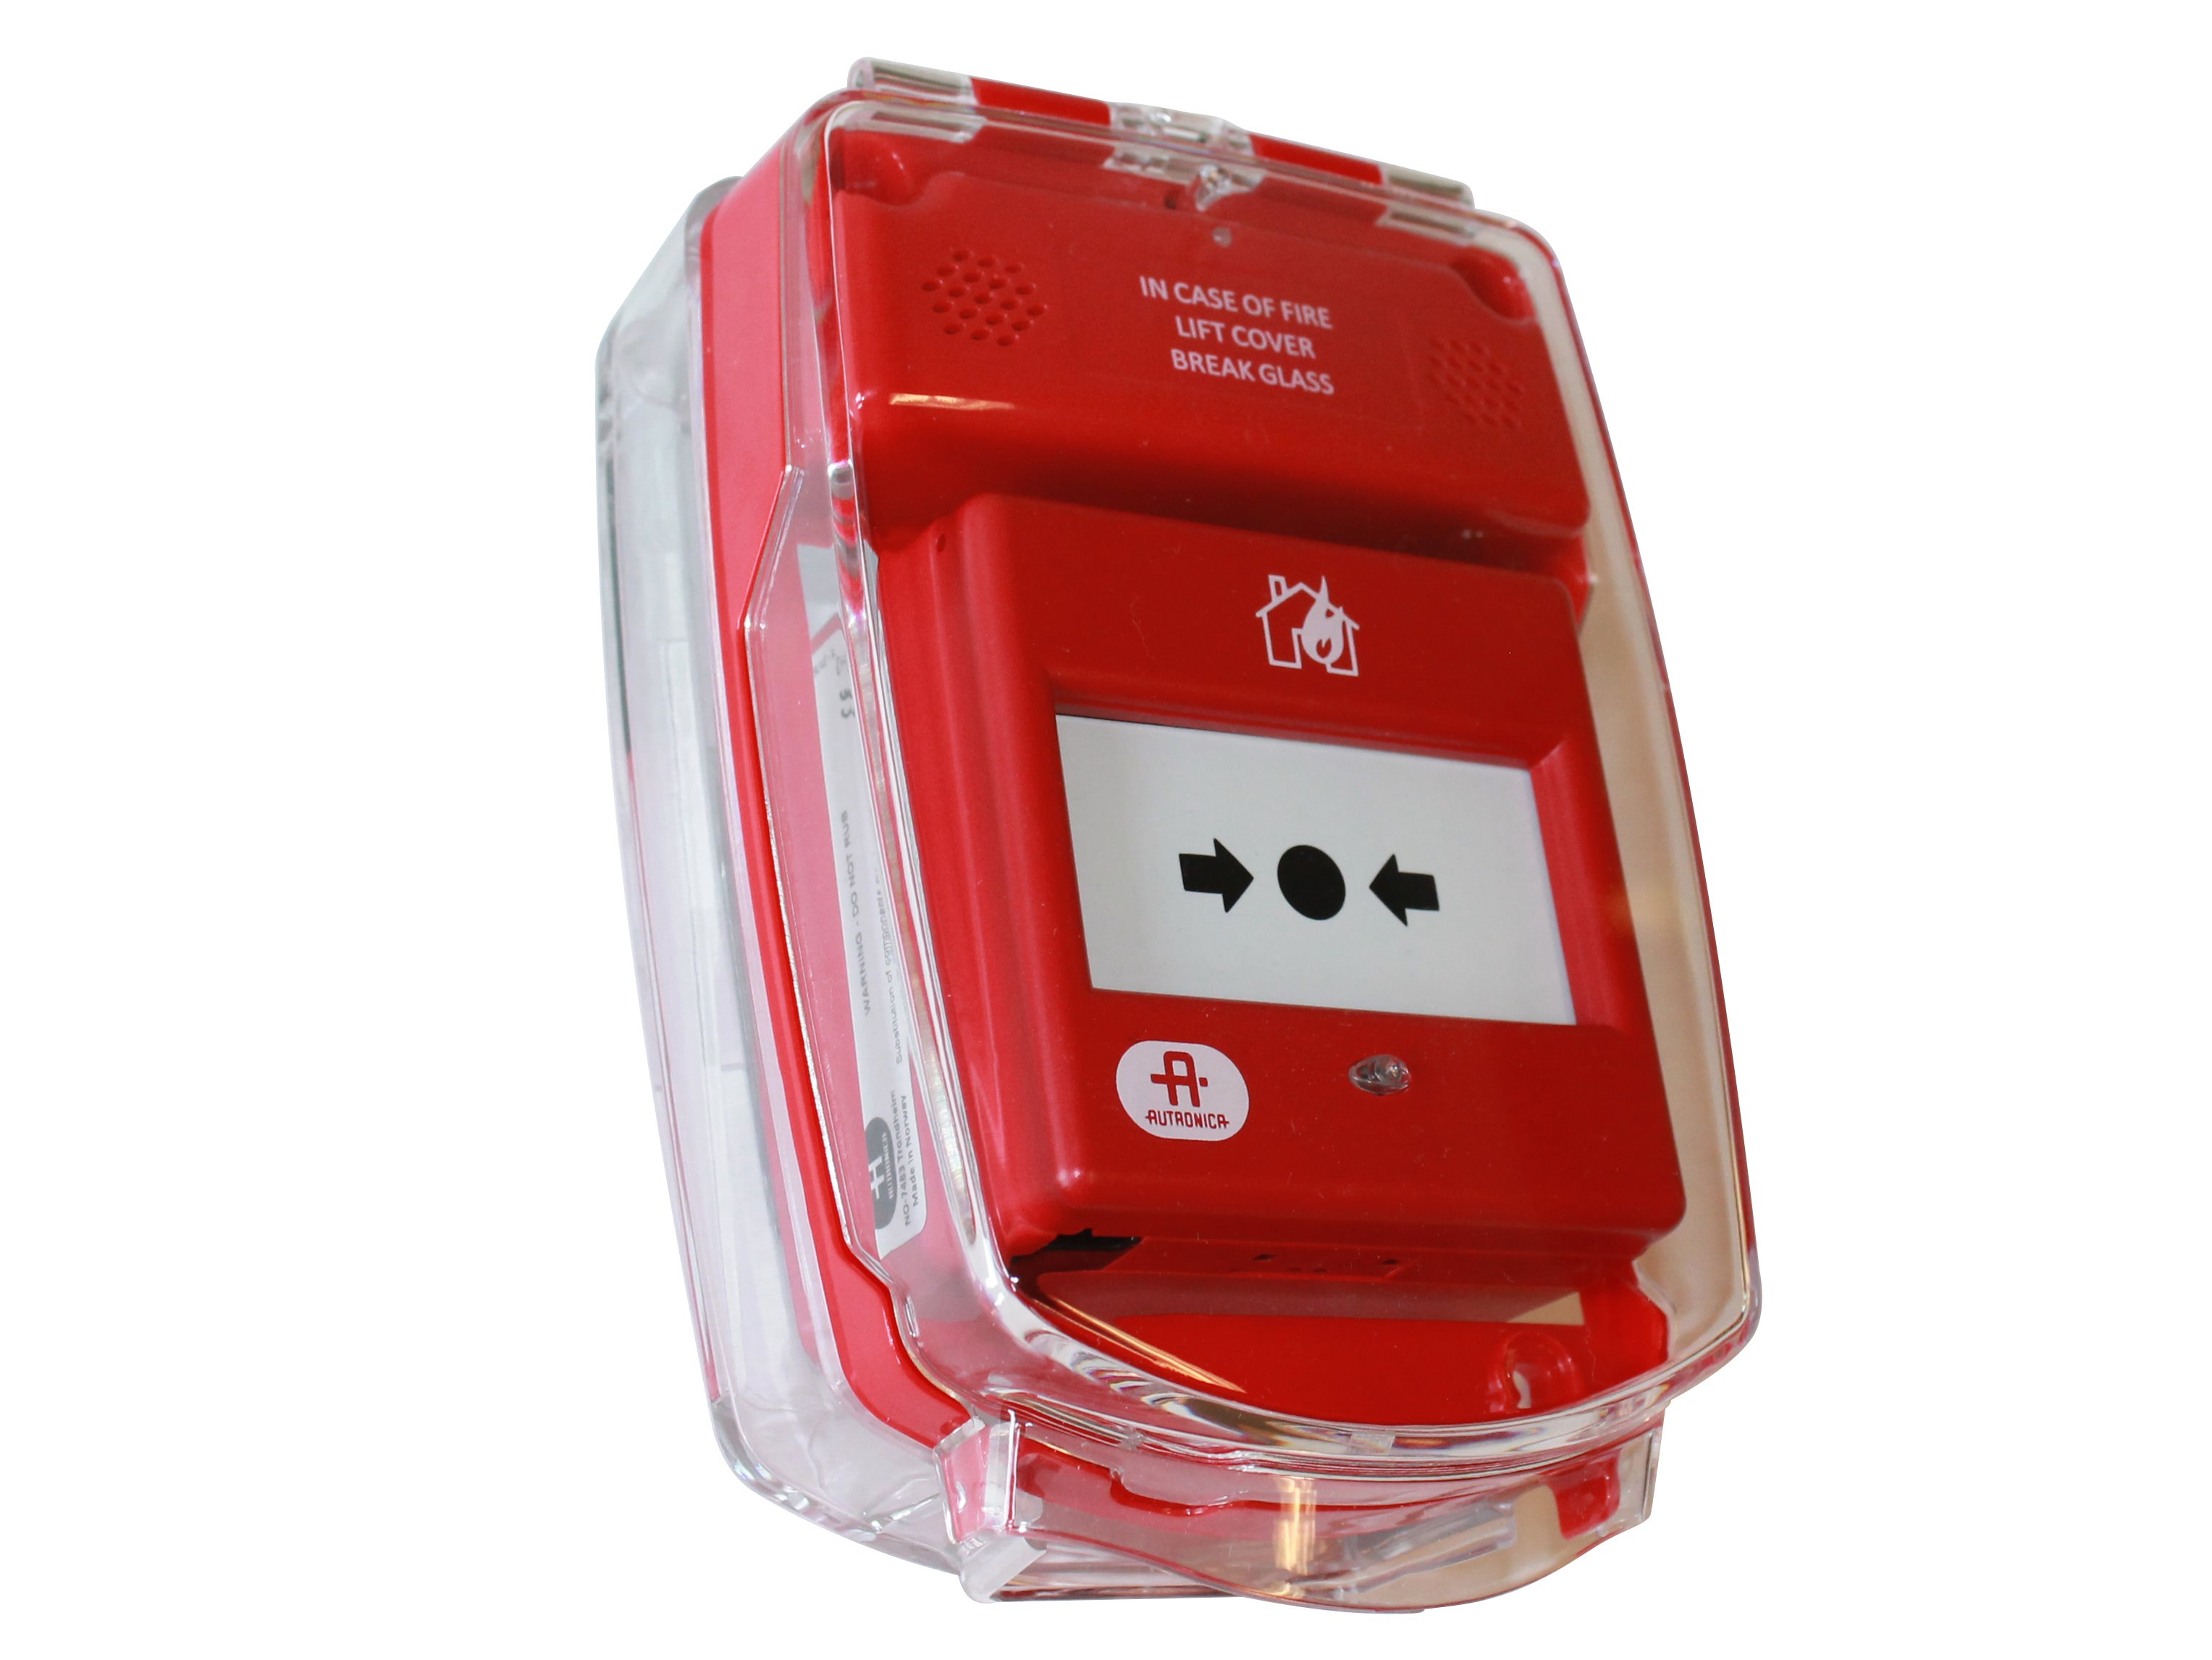 £5 Break Glass Cover KAC Fire Alarm Call Point Cover Square flat type vat 